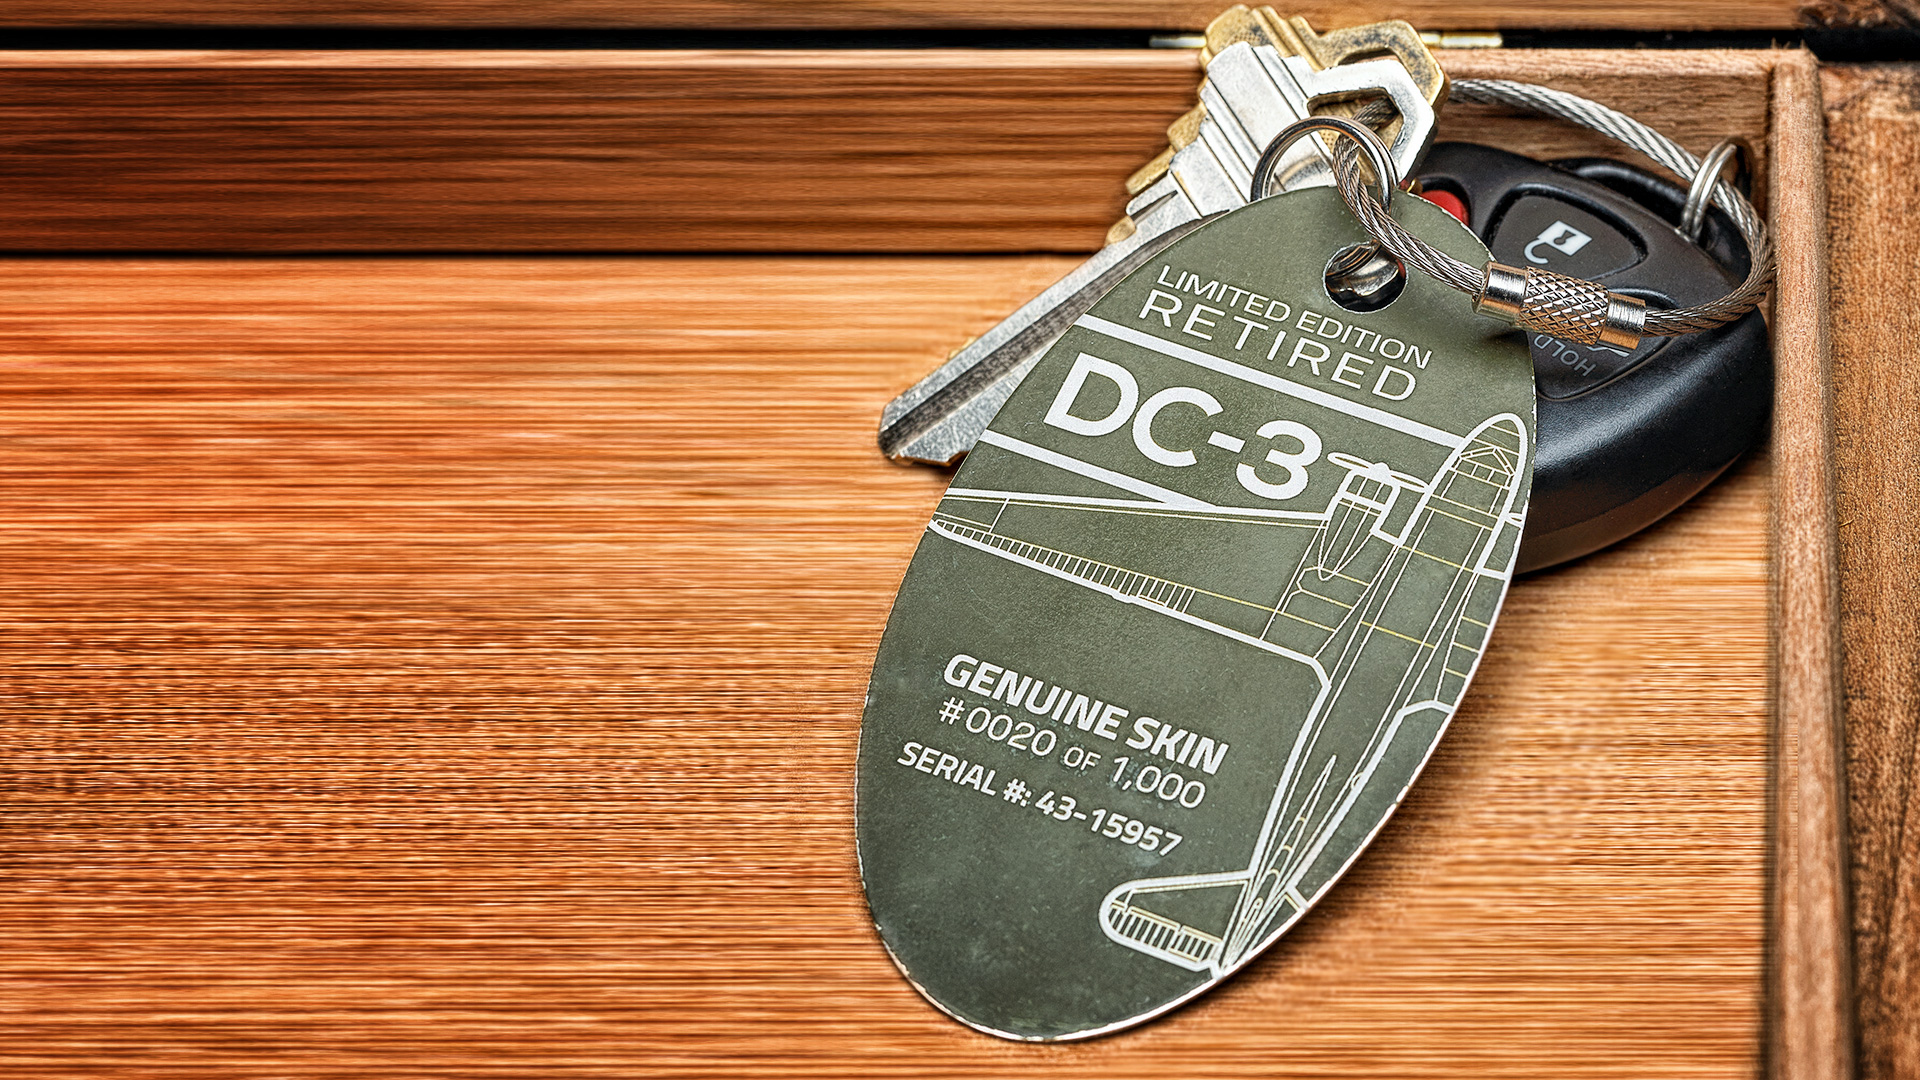 Plane tags can be used as key chains, luggage tags, or even dog tags (Source: Plane Tags)